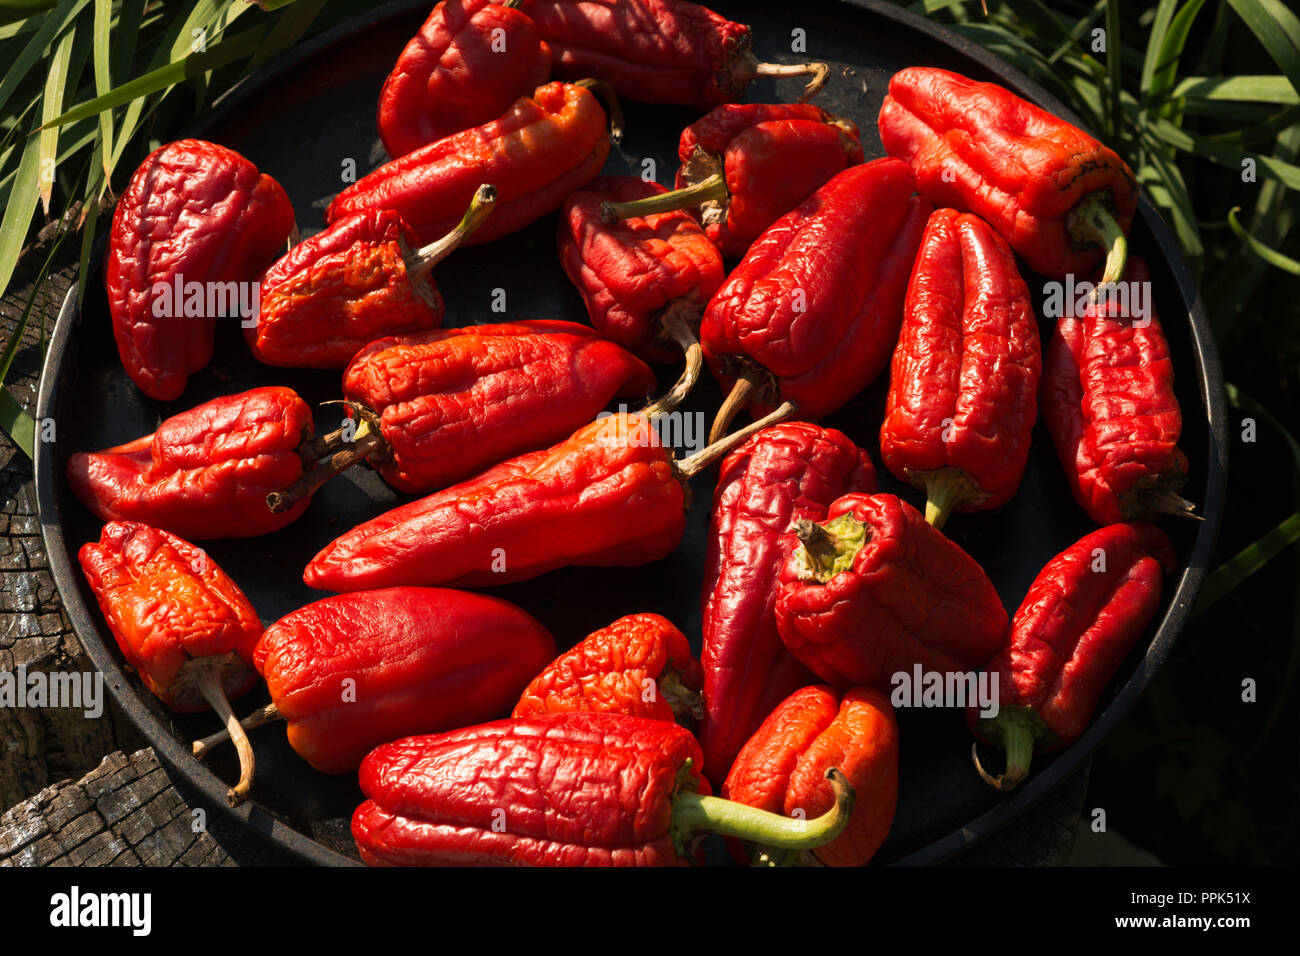 drying red bell peppers Stock Photo